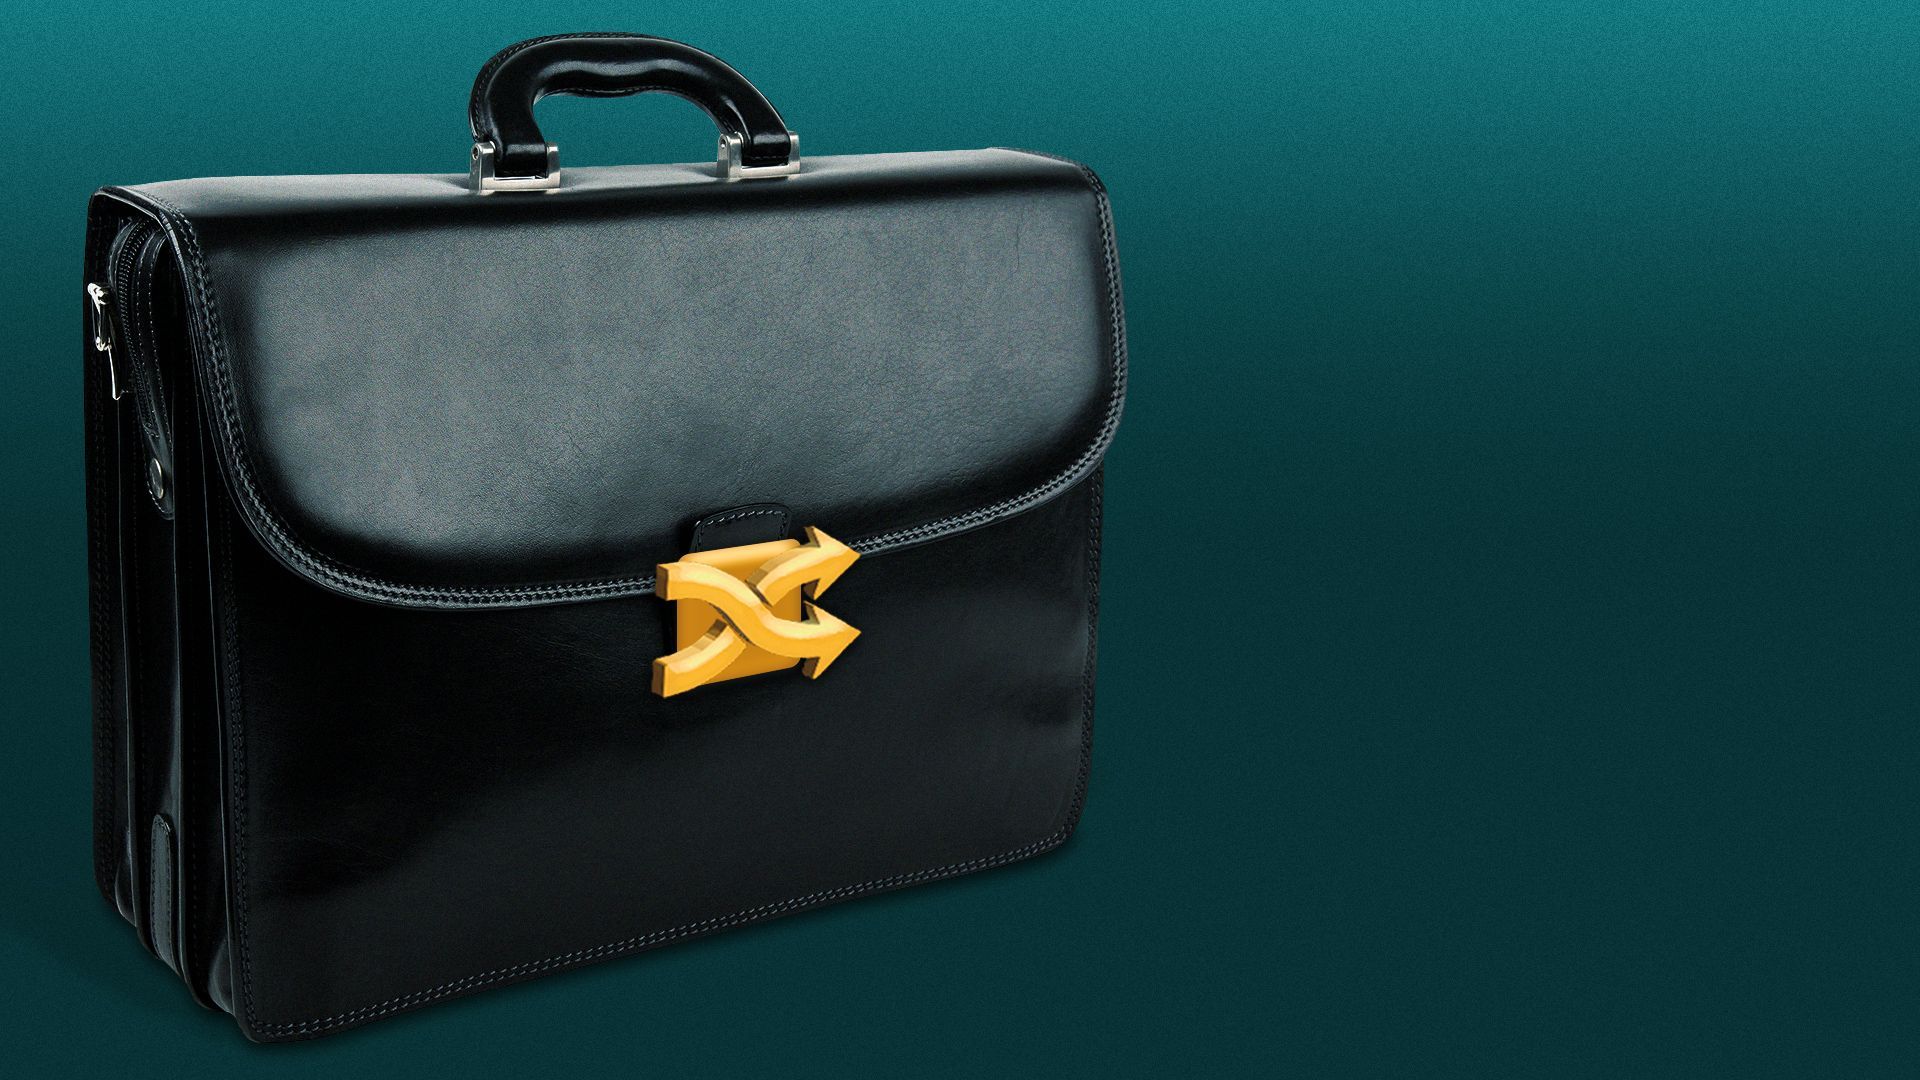 Illustration of a briefcase with a buckle in the shape of a shuffle icon.